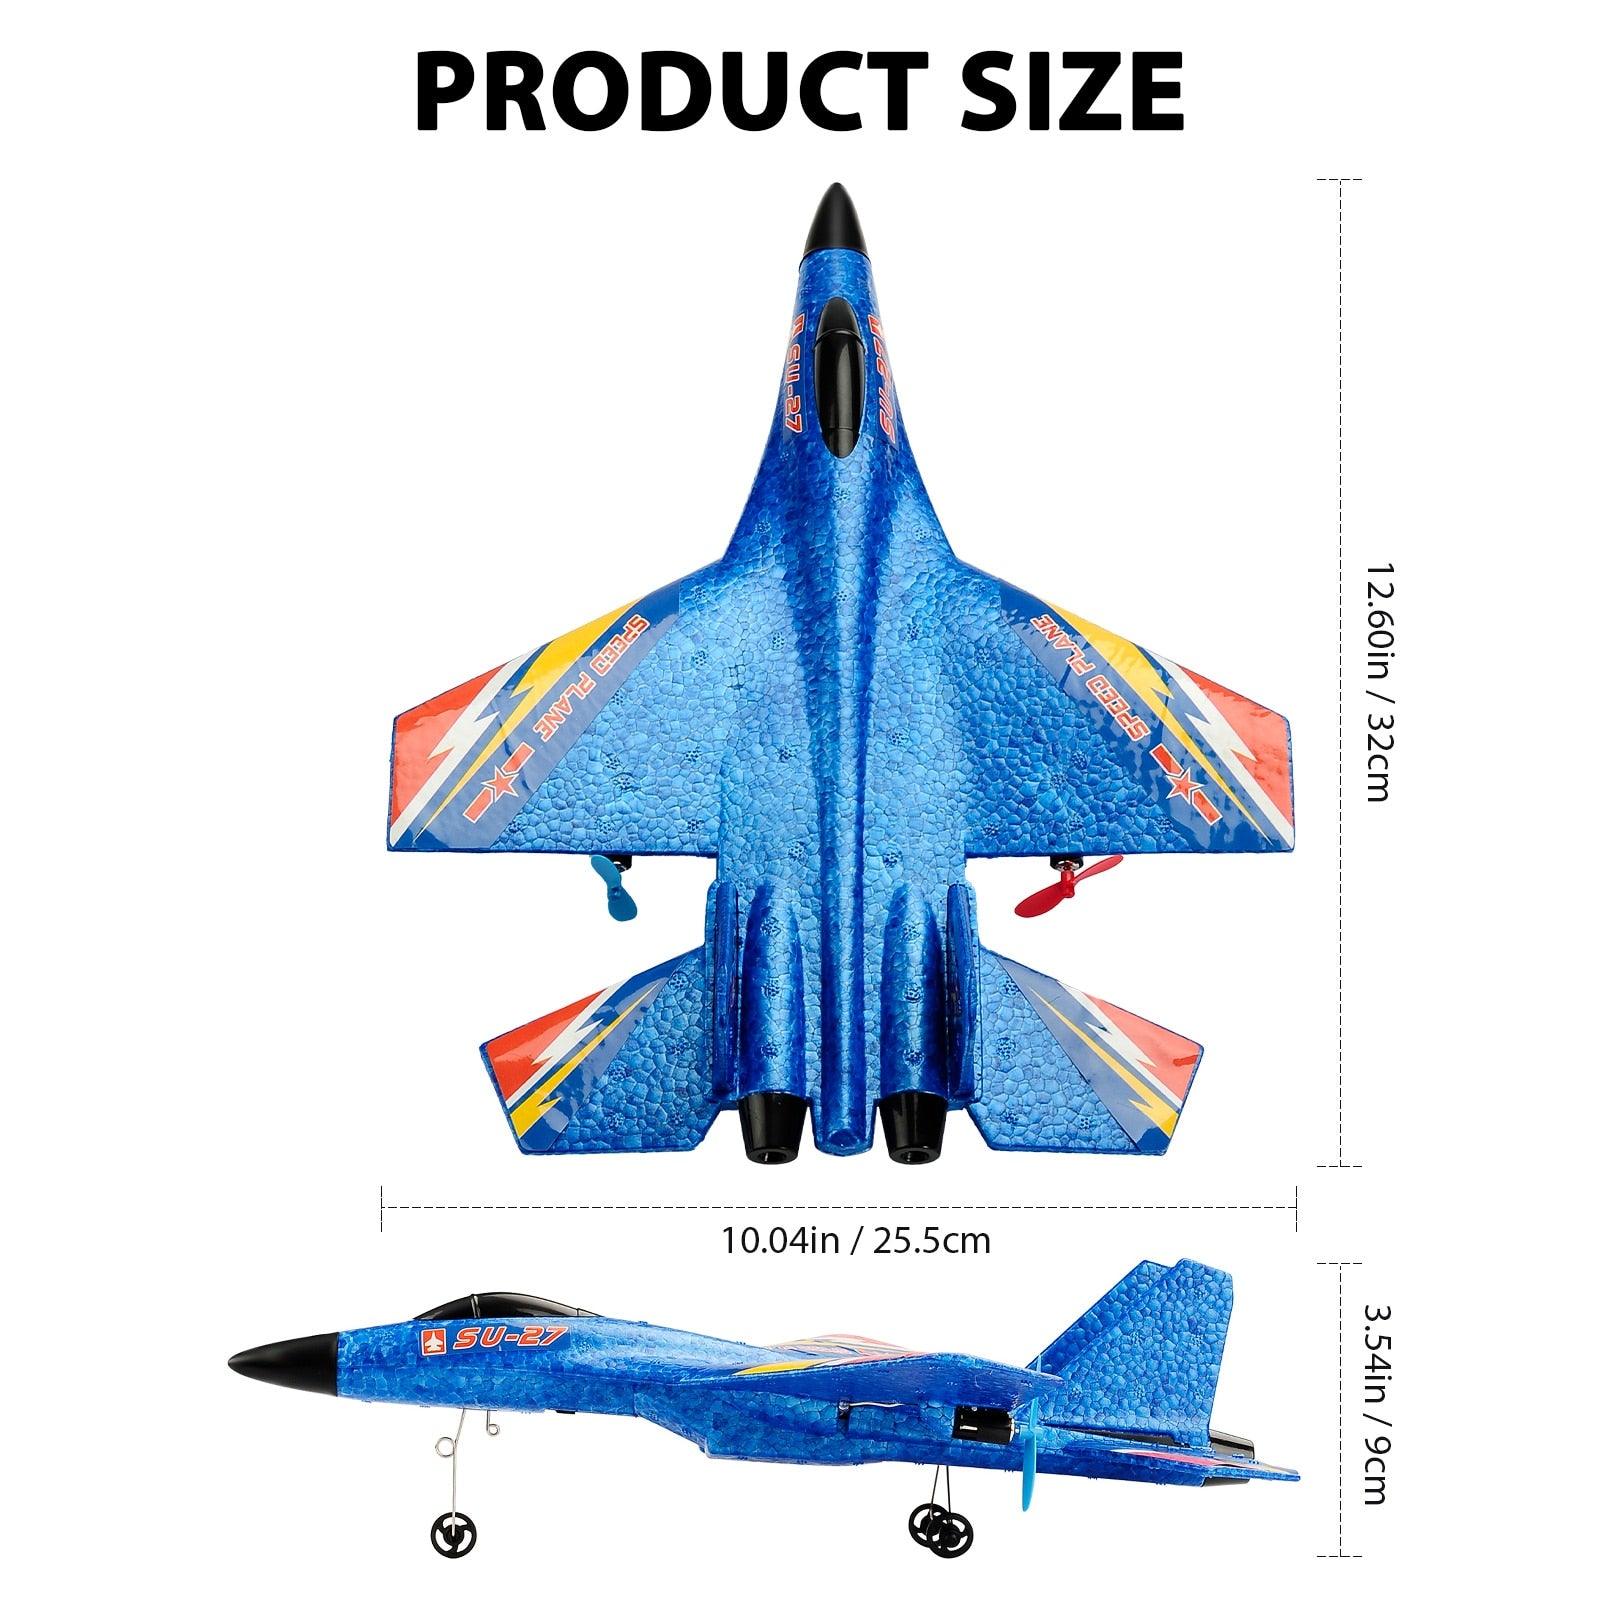 SU-27 RC Plane - Aircraft Remote Control Helicopter 2.4G Airplane EPP Foam RC Vertical Plane Children Toys Gifts - RCDrone